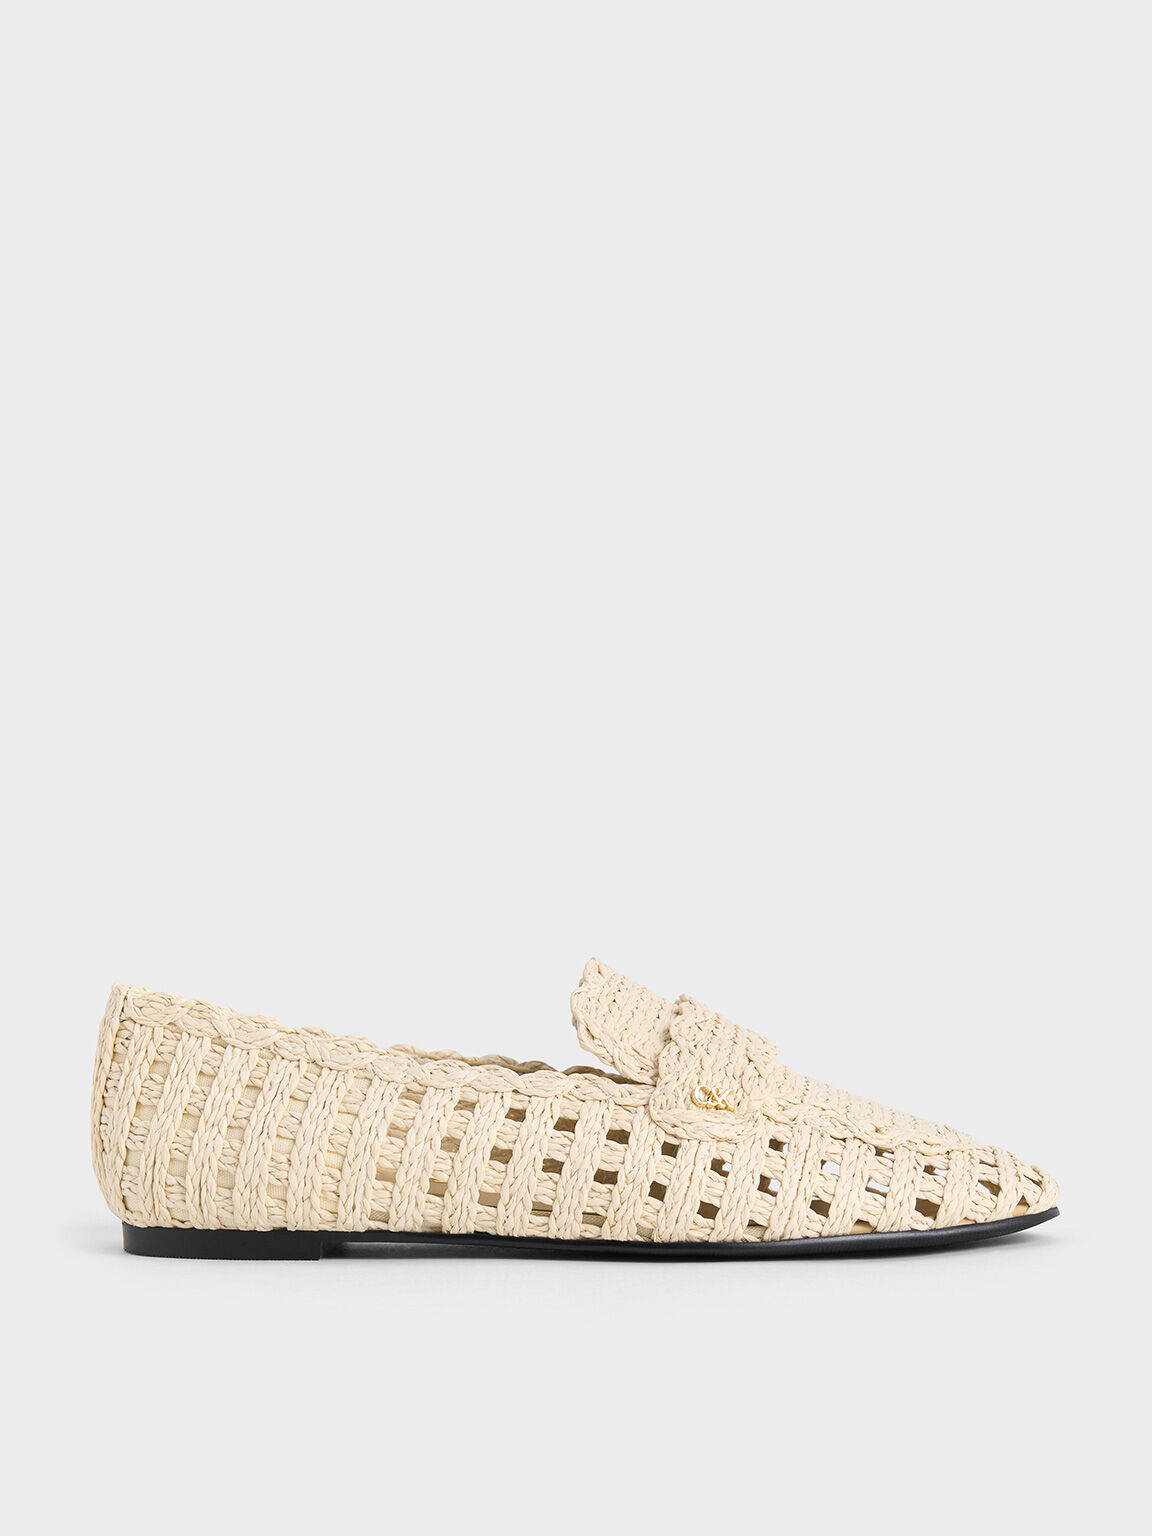 Women's Loafers | Shop Exclusive Styles | CHARLES u0026 KEITH International